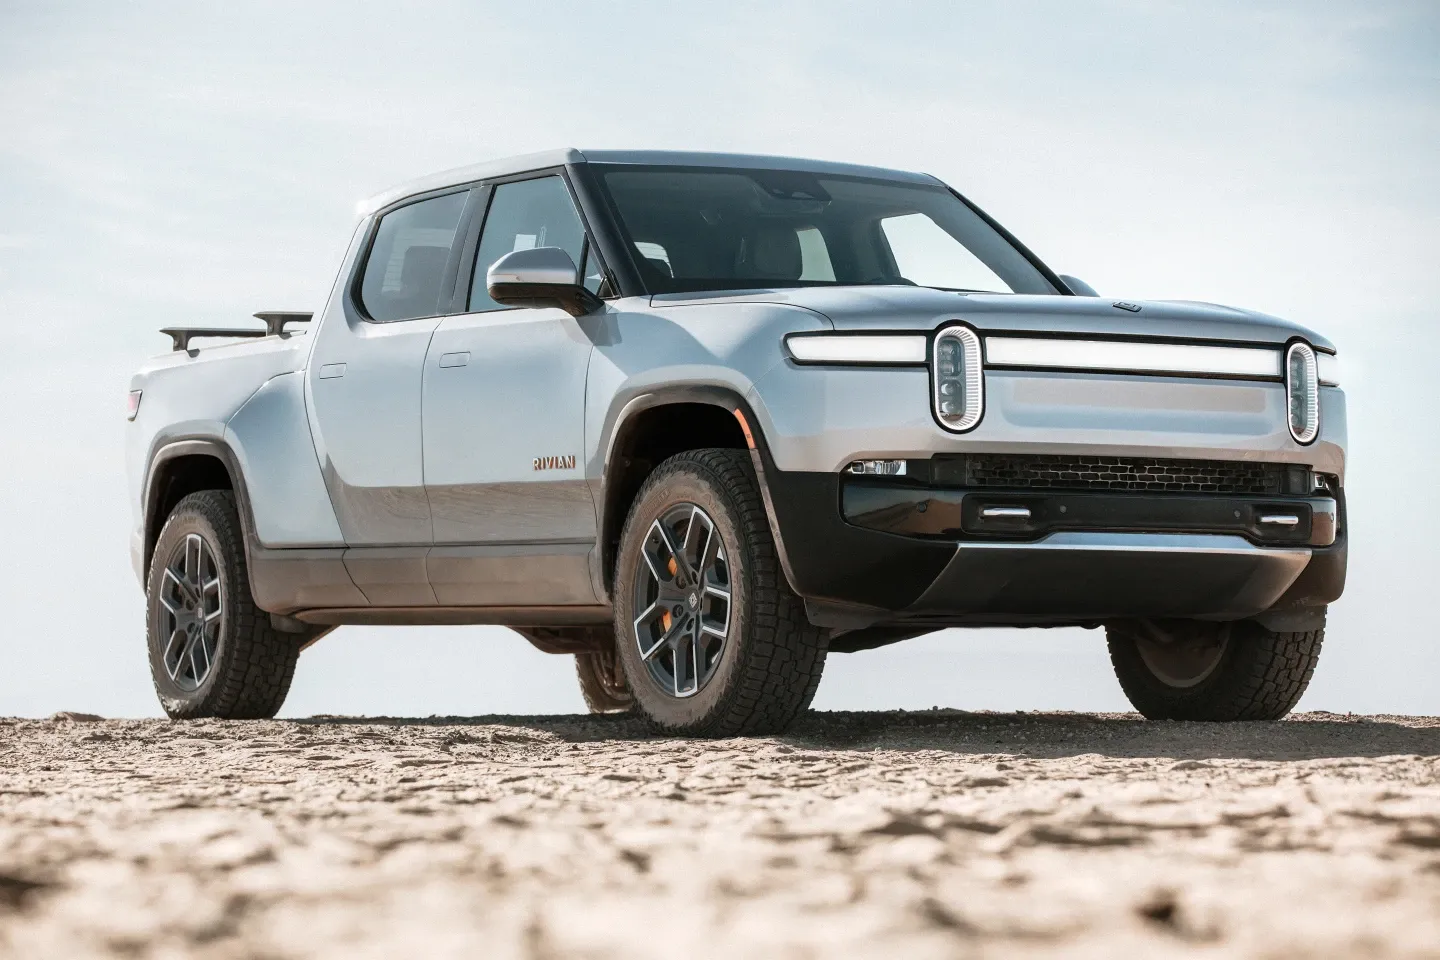 Pictured is Rivian's electric R1T truck model. The company hopes to appeal to outdoor enthusiasts with its eco-friendly approach.